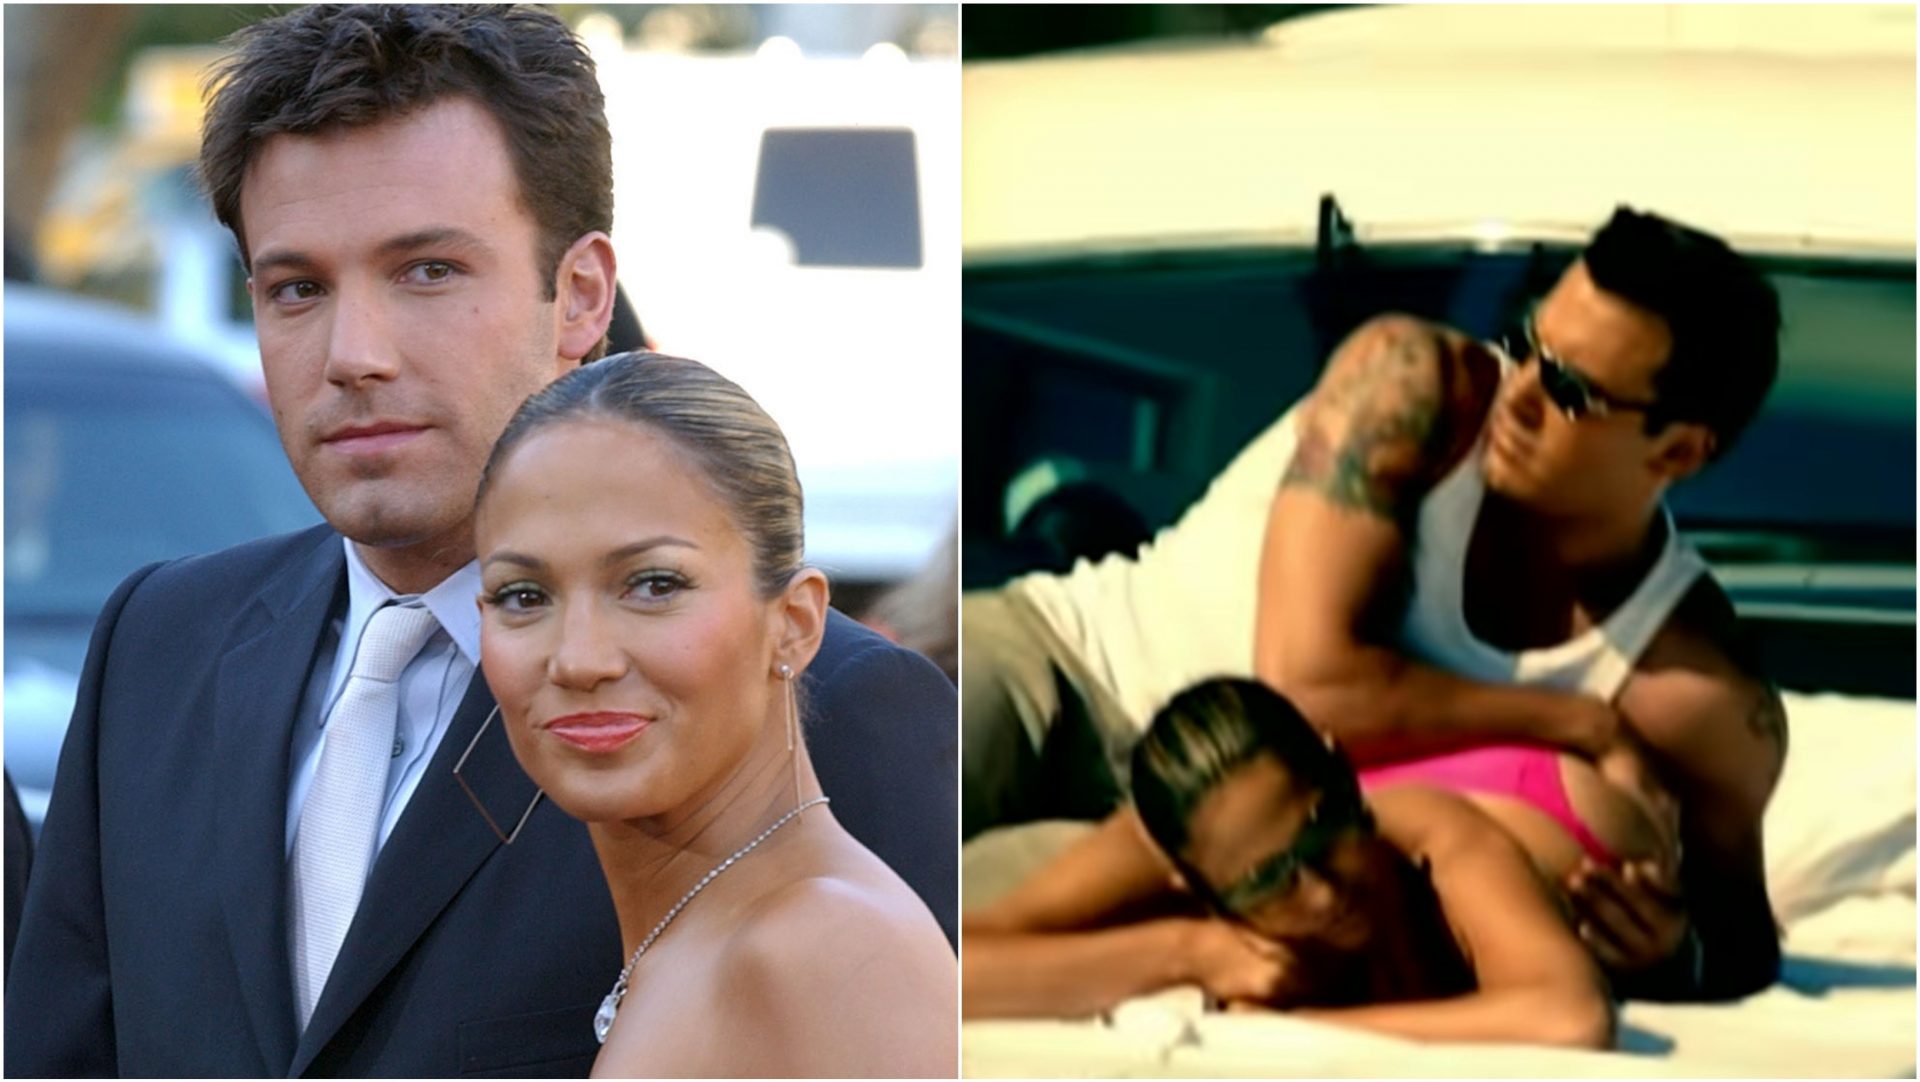 Jennifer Lopez and Ben Affleck Recreated That Steamy ‘Jenny from the Block’ Yacht Scene